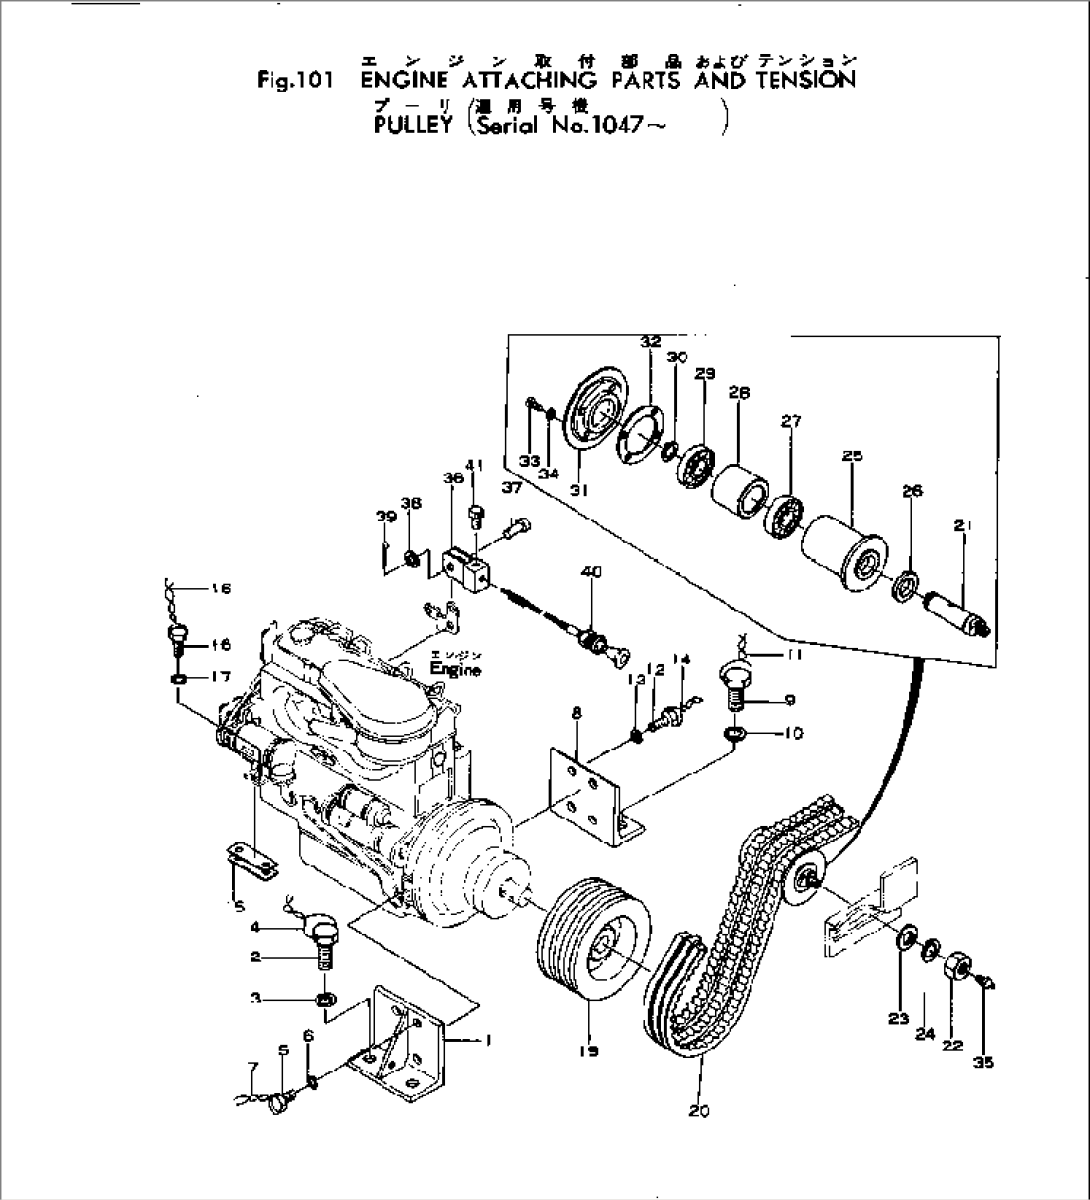 ENGINE ATTACHING PARTS AND TENSION PULLEY